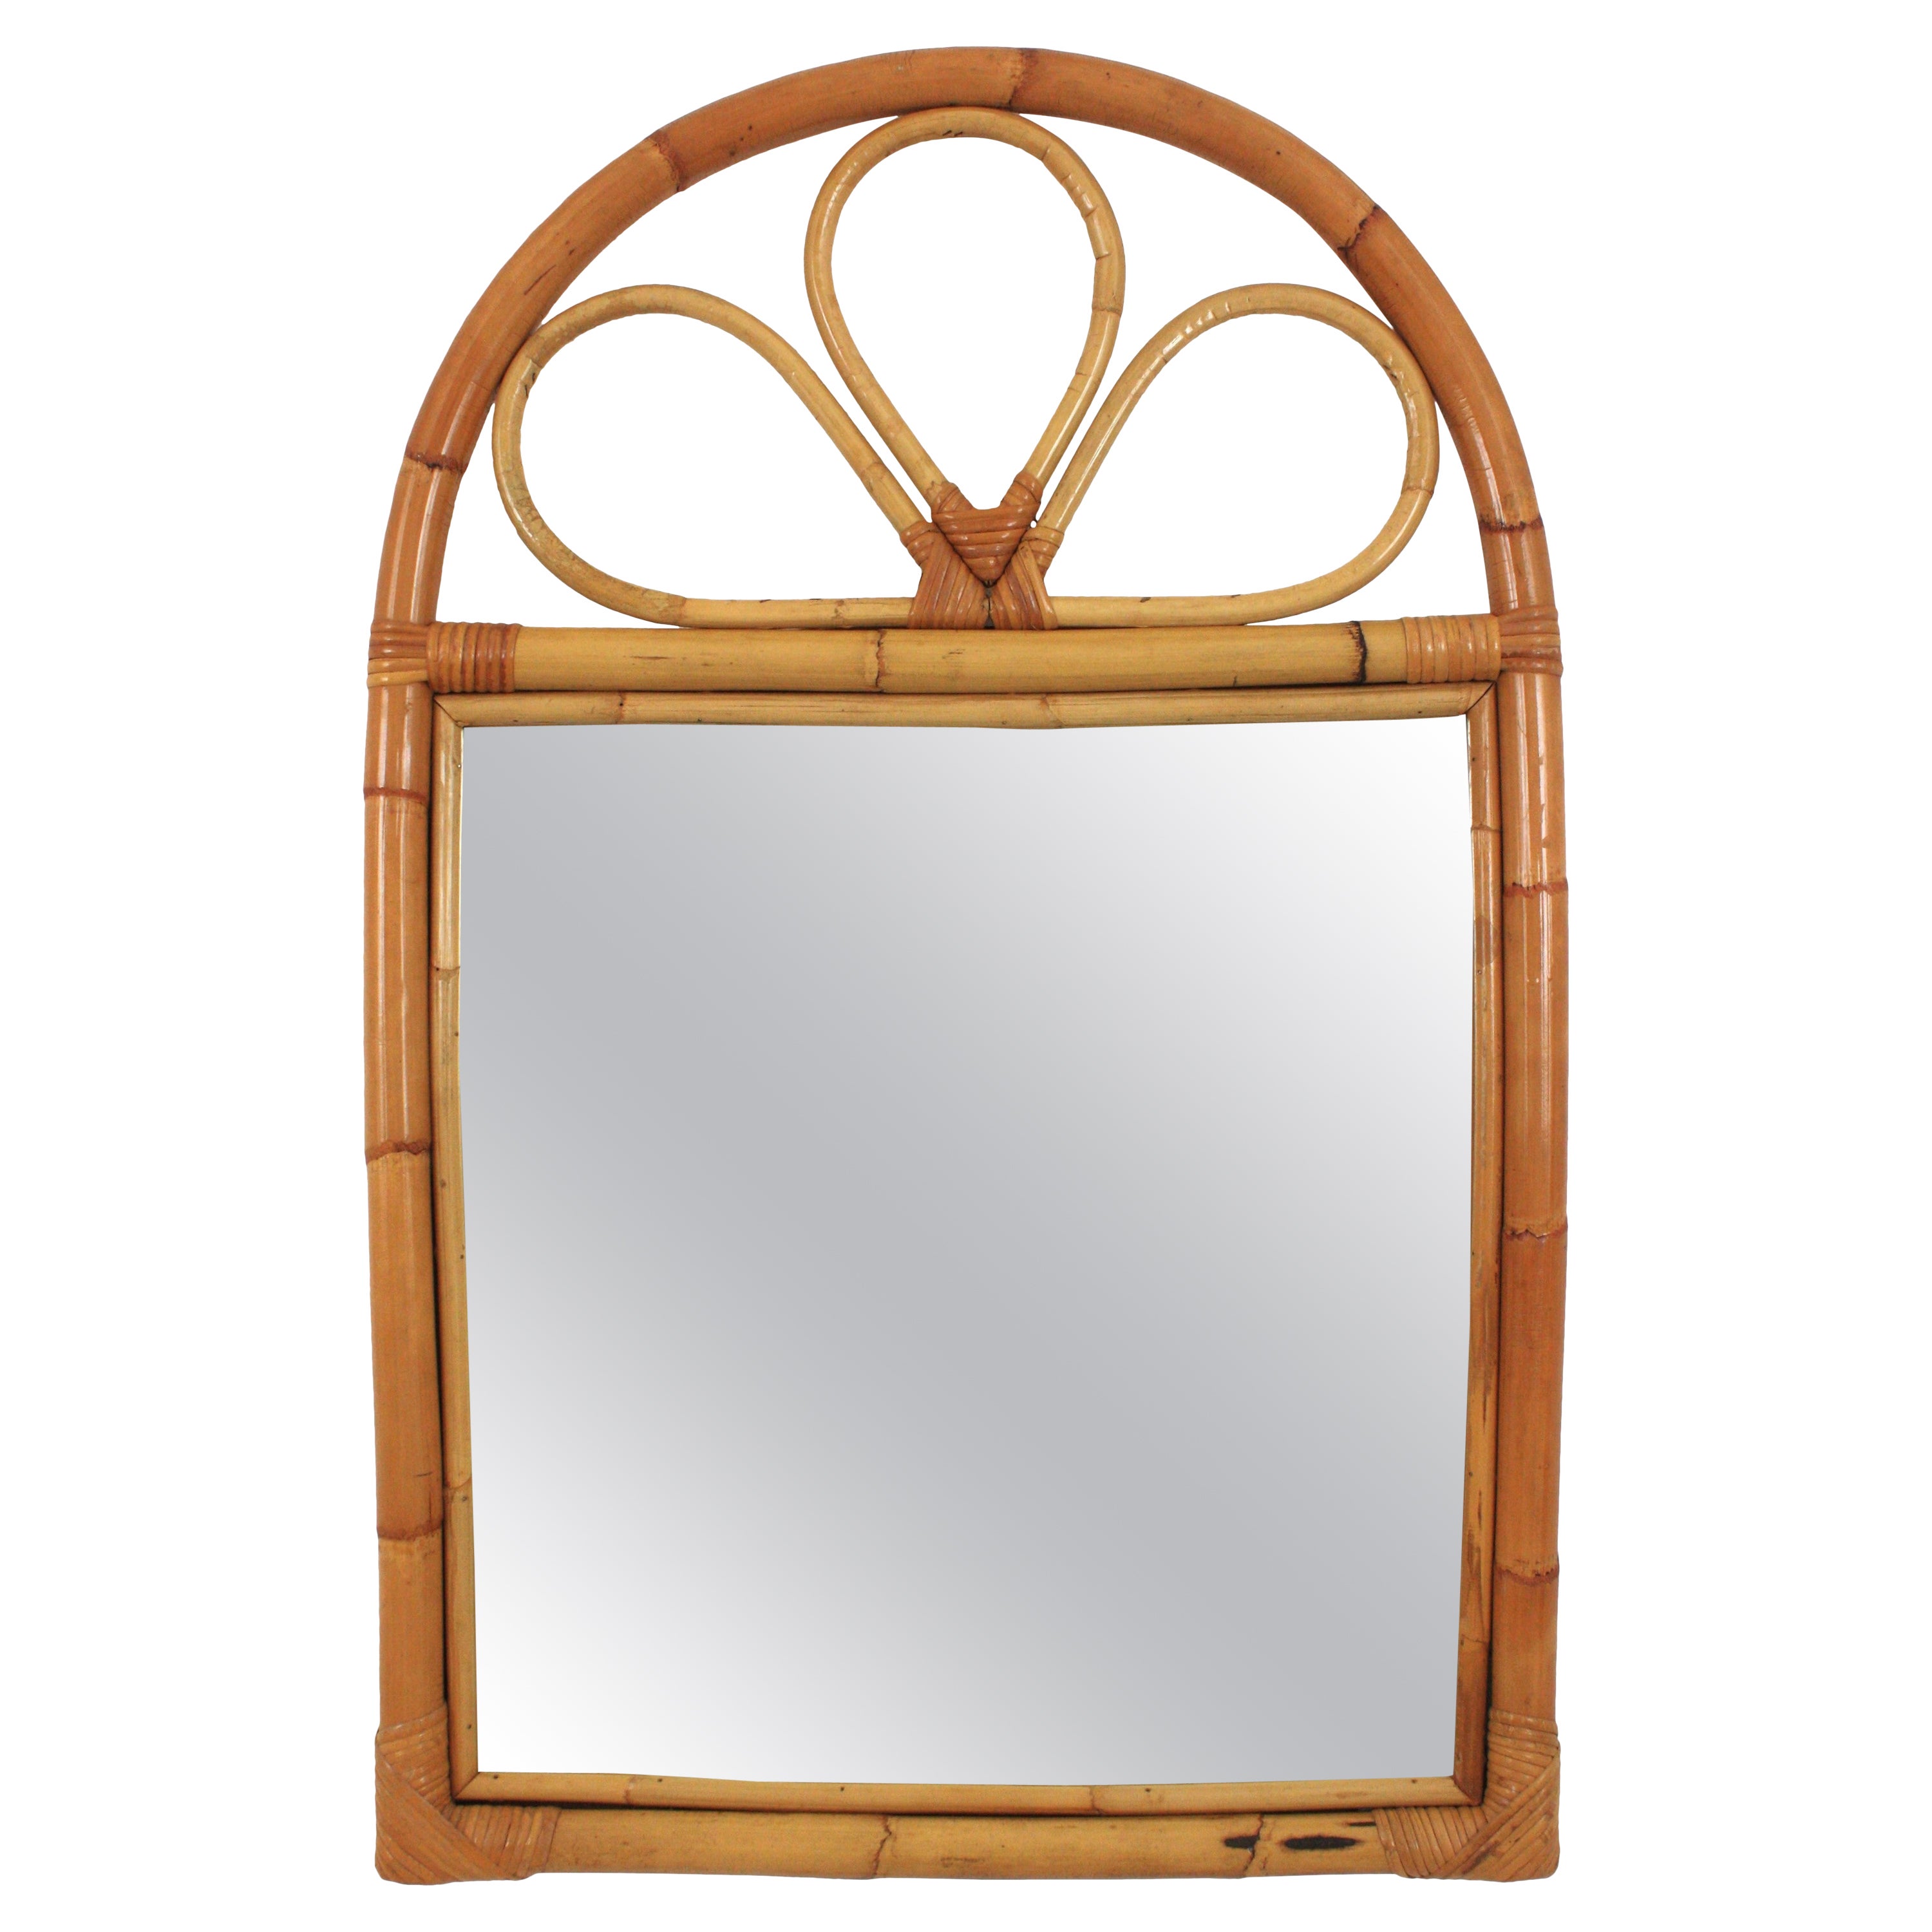 Spanish Rattan Bamboo Mirror with Arched Top, 1960s For Sale